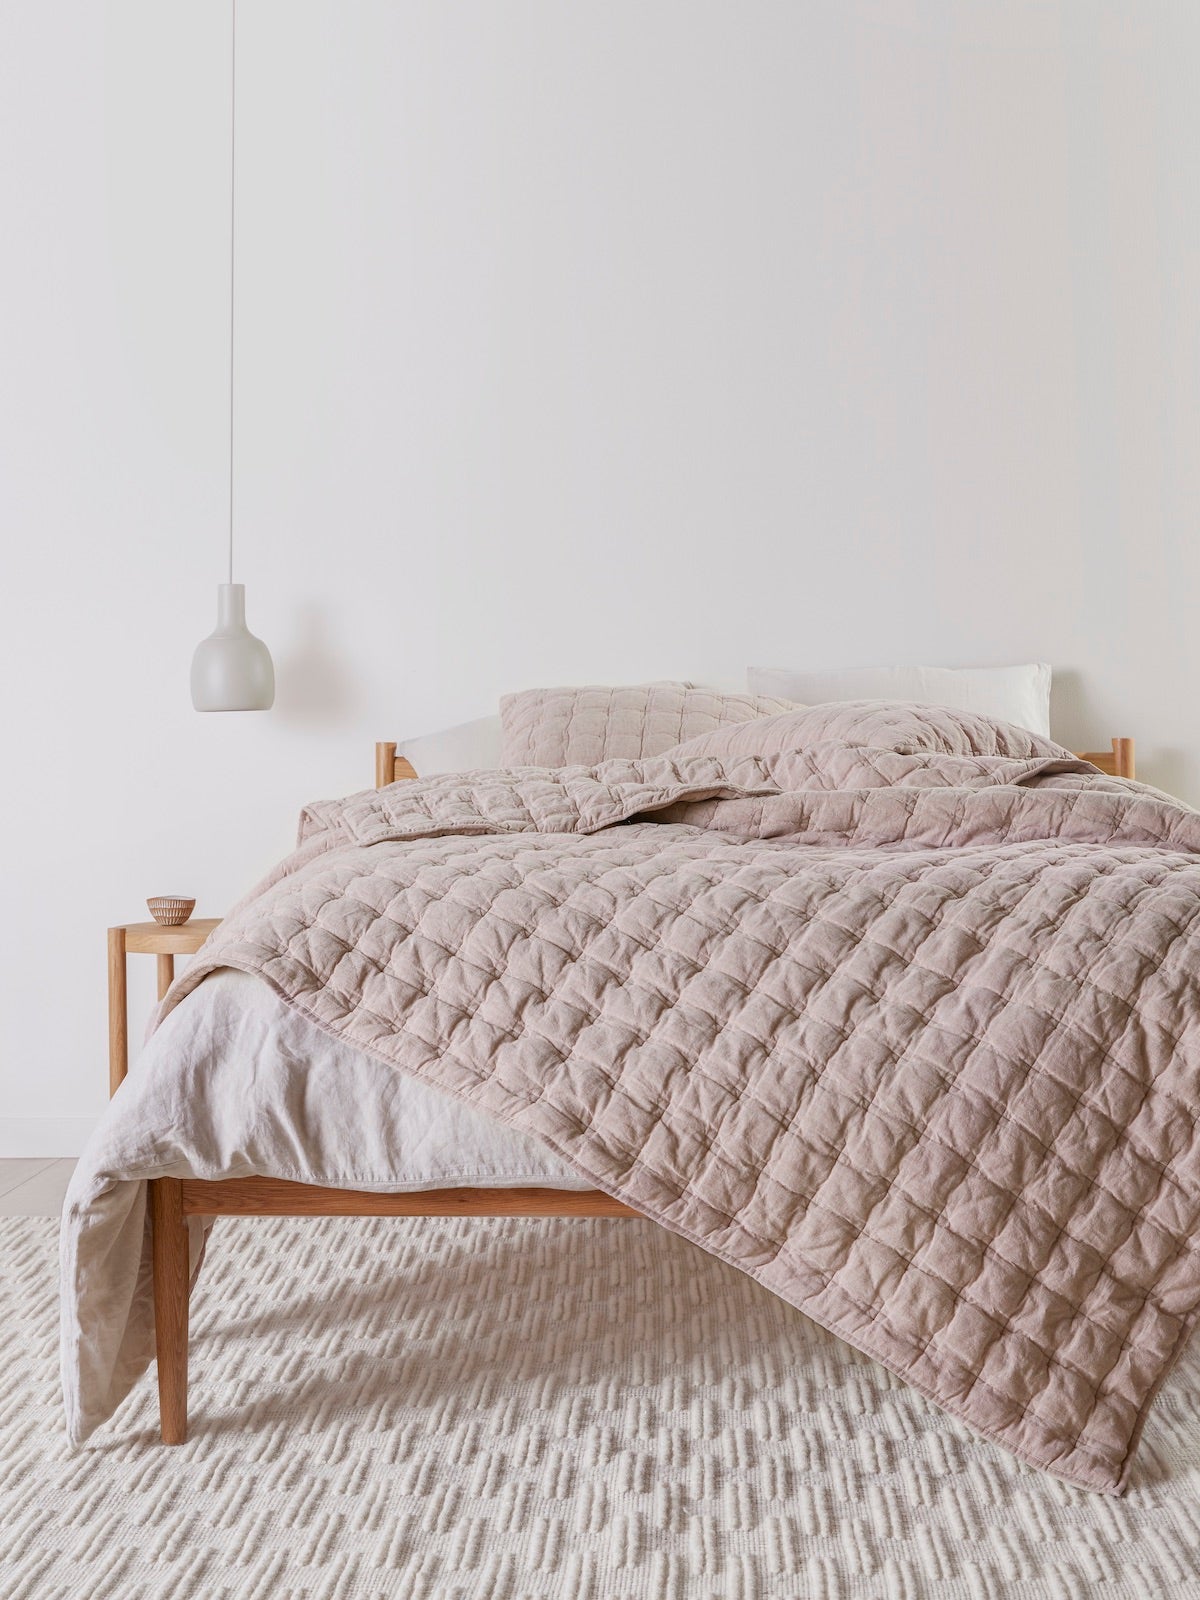 Quilted blush bedspread on unmade bed